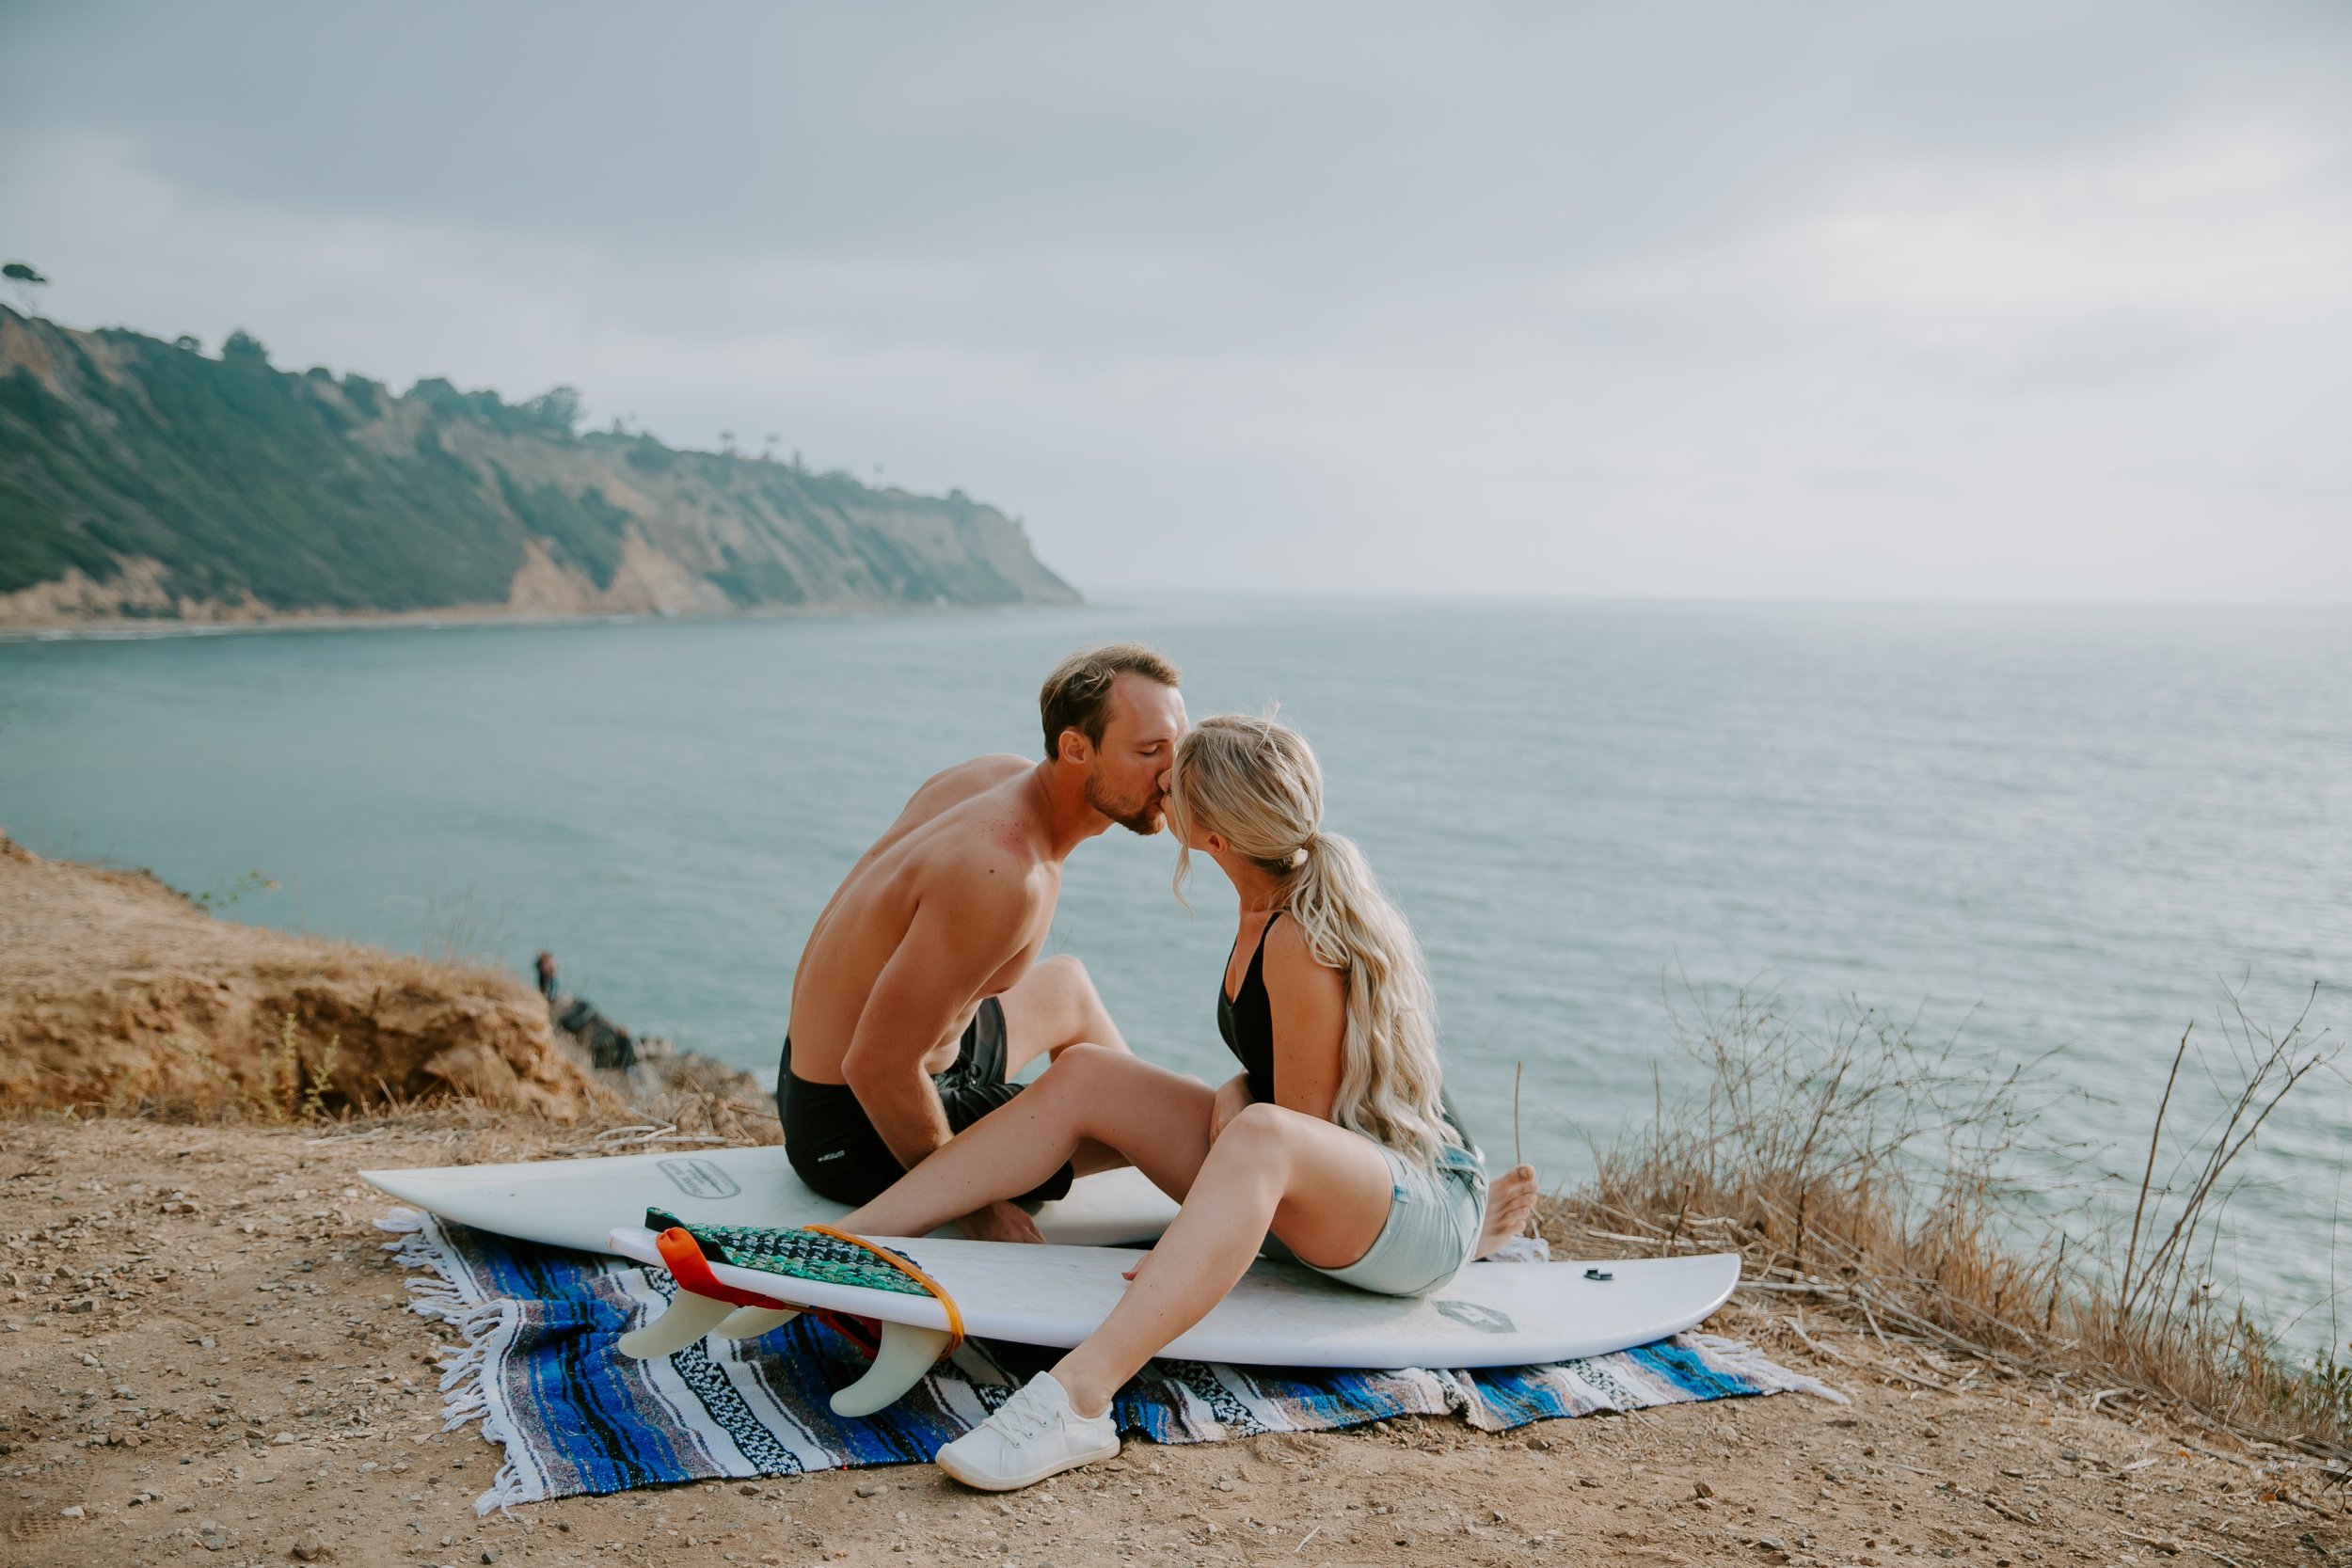 Engagement Shoot Prop Surfboard Guide Luxury Wedding Photography